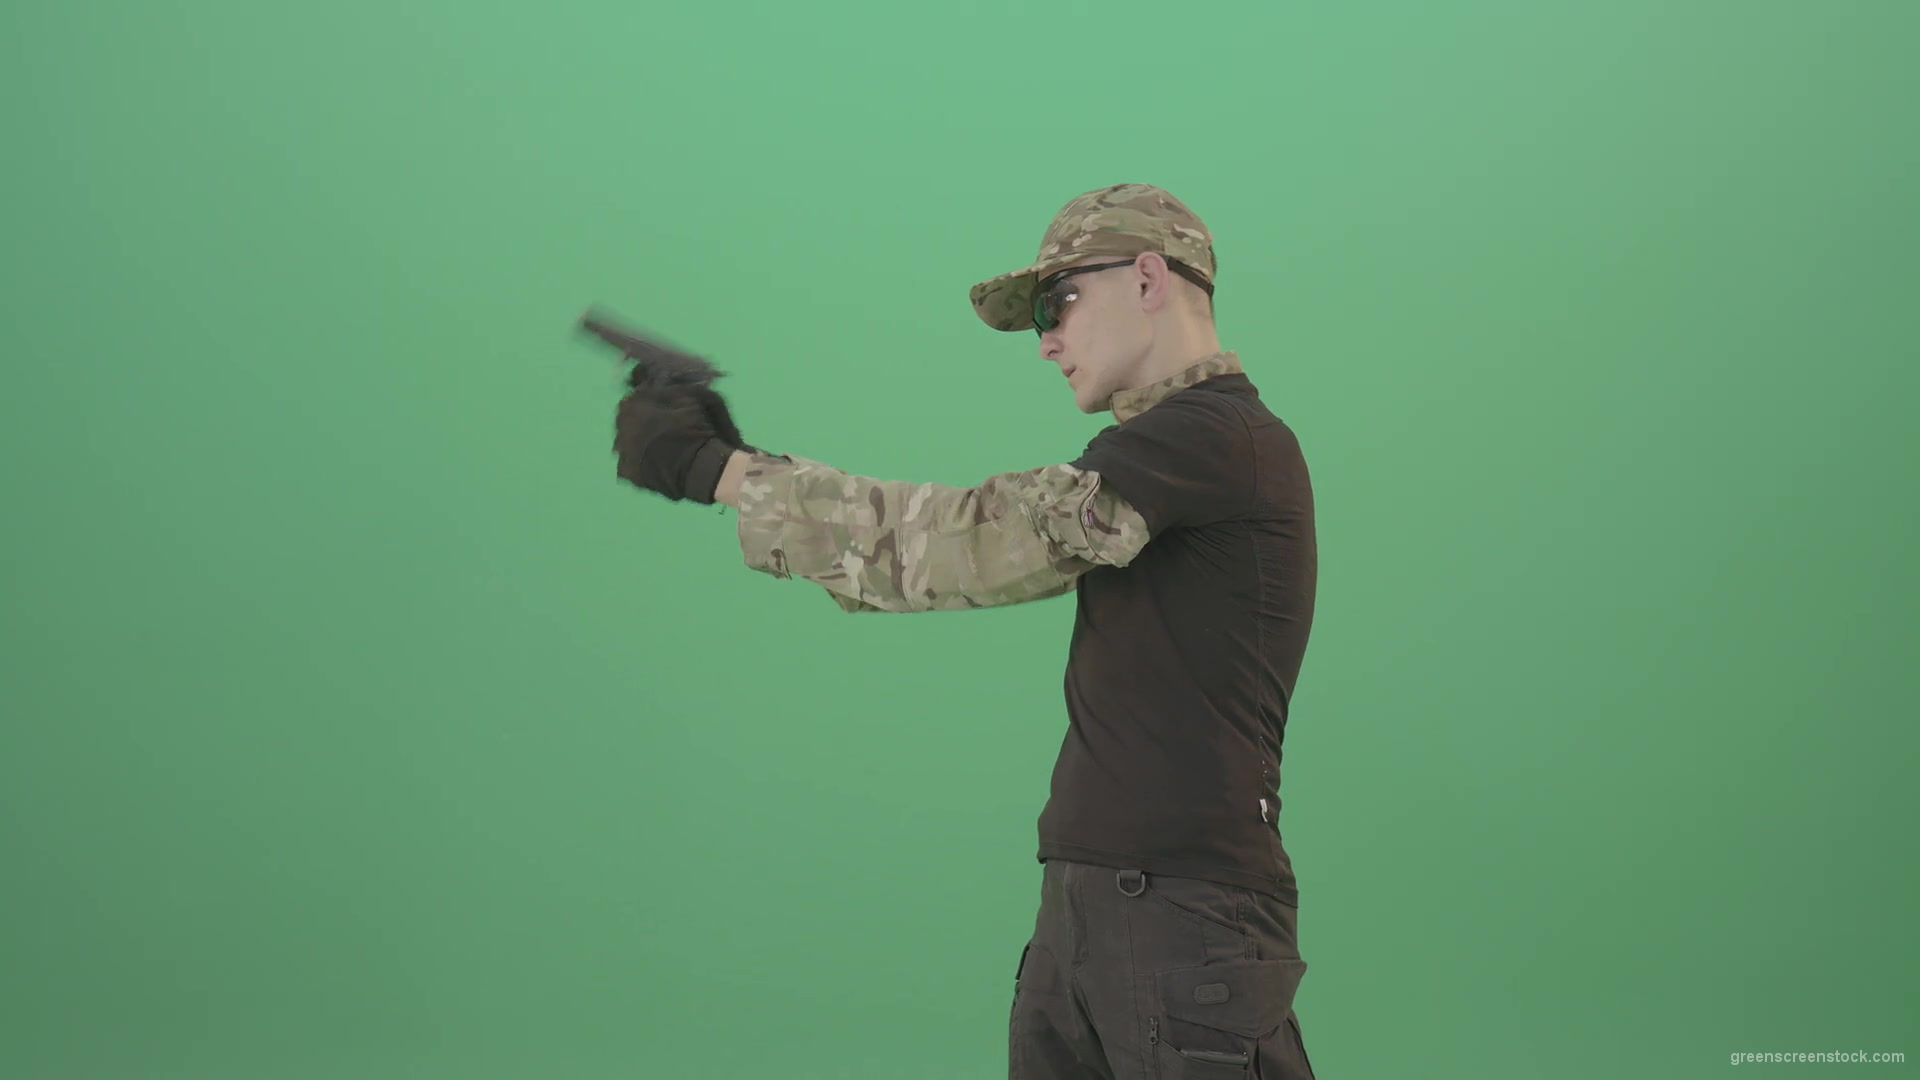 Army-Man-Assassin-shooting-with-small-gun-isolated-on-green-screen-4K-Video-Footage-1920_008 Green Screen Stock